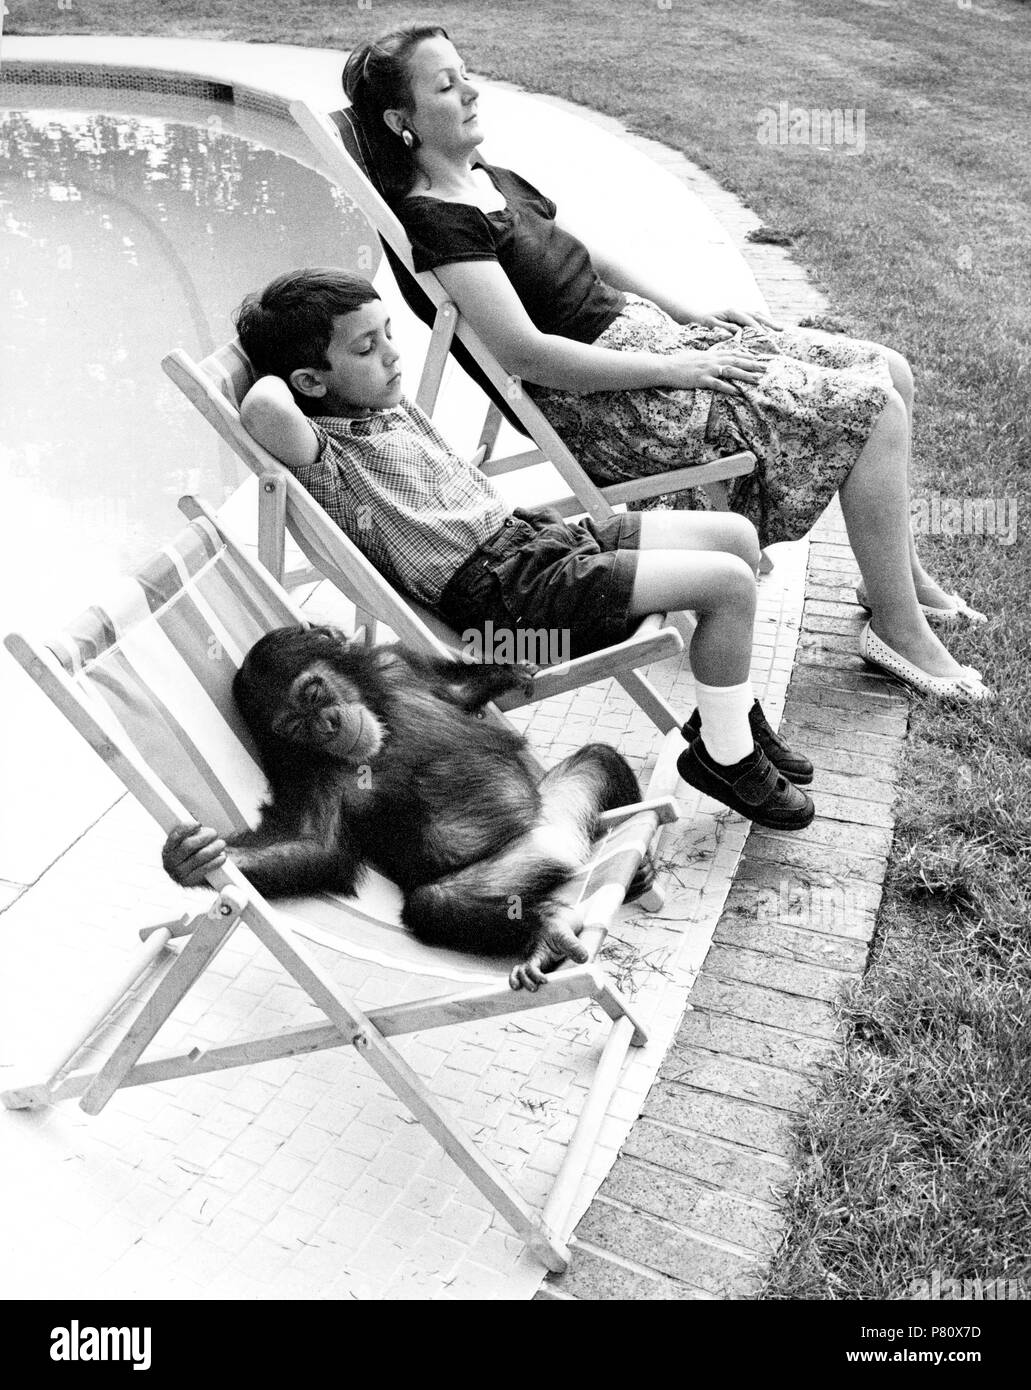 Family with chimpanzee relax at the pool, England, Great Britain Stock Photo